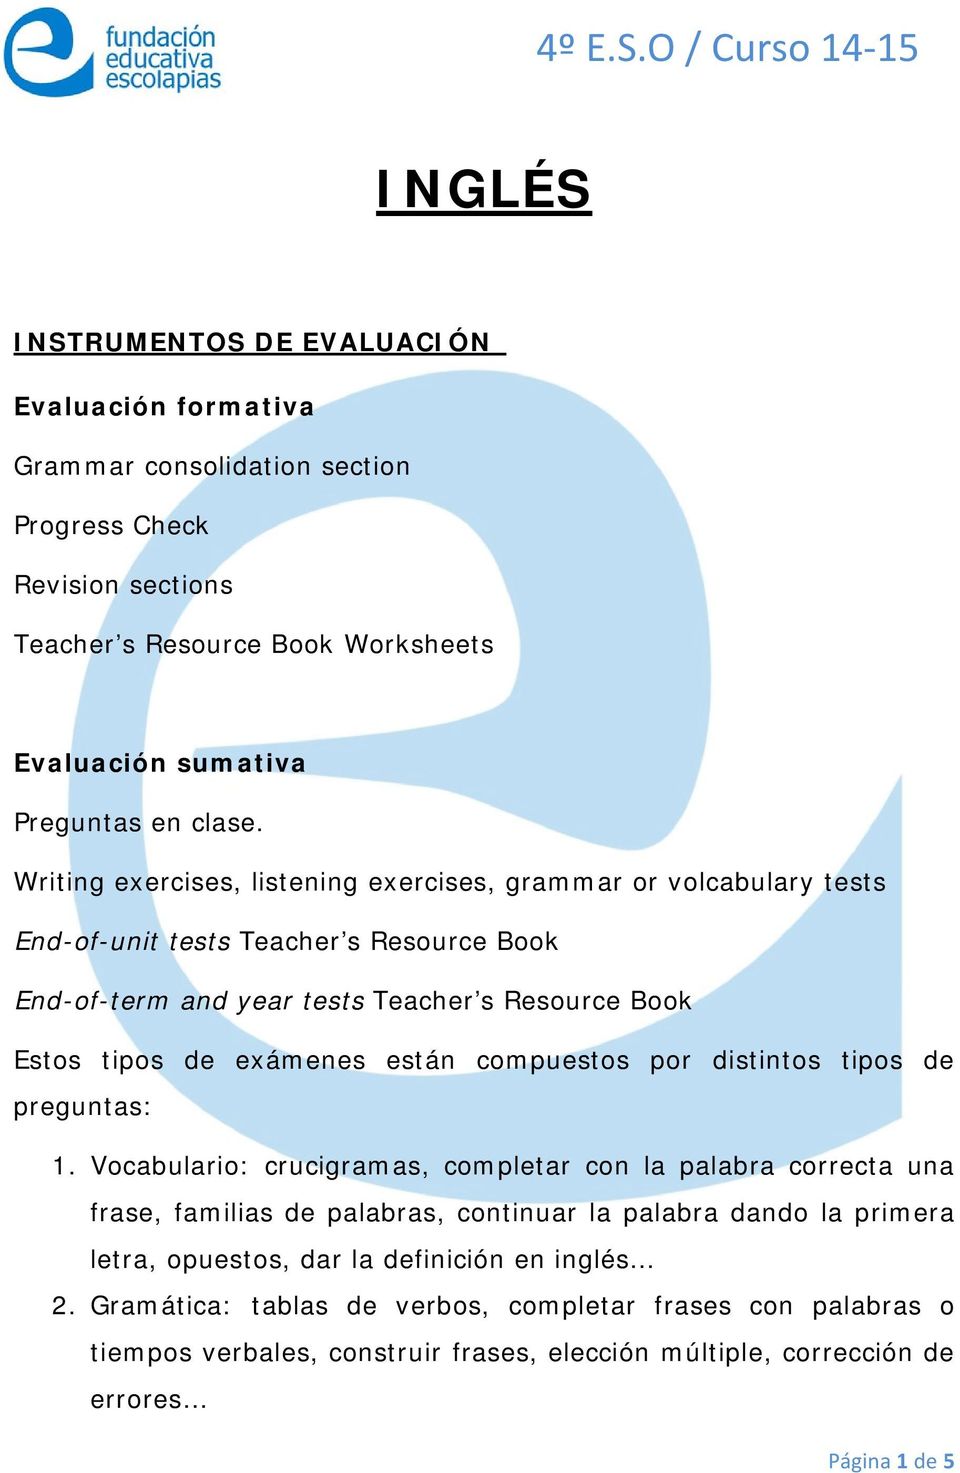 Writing exercises, listening exercises, grammar or volcabulary tests End-of-unit tests Teacher s Resource Book End-of-term and year tests Teacher s Resource Book Estos tipos de exámenes